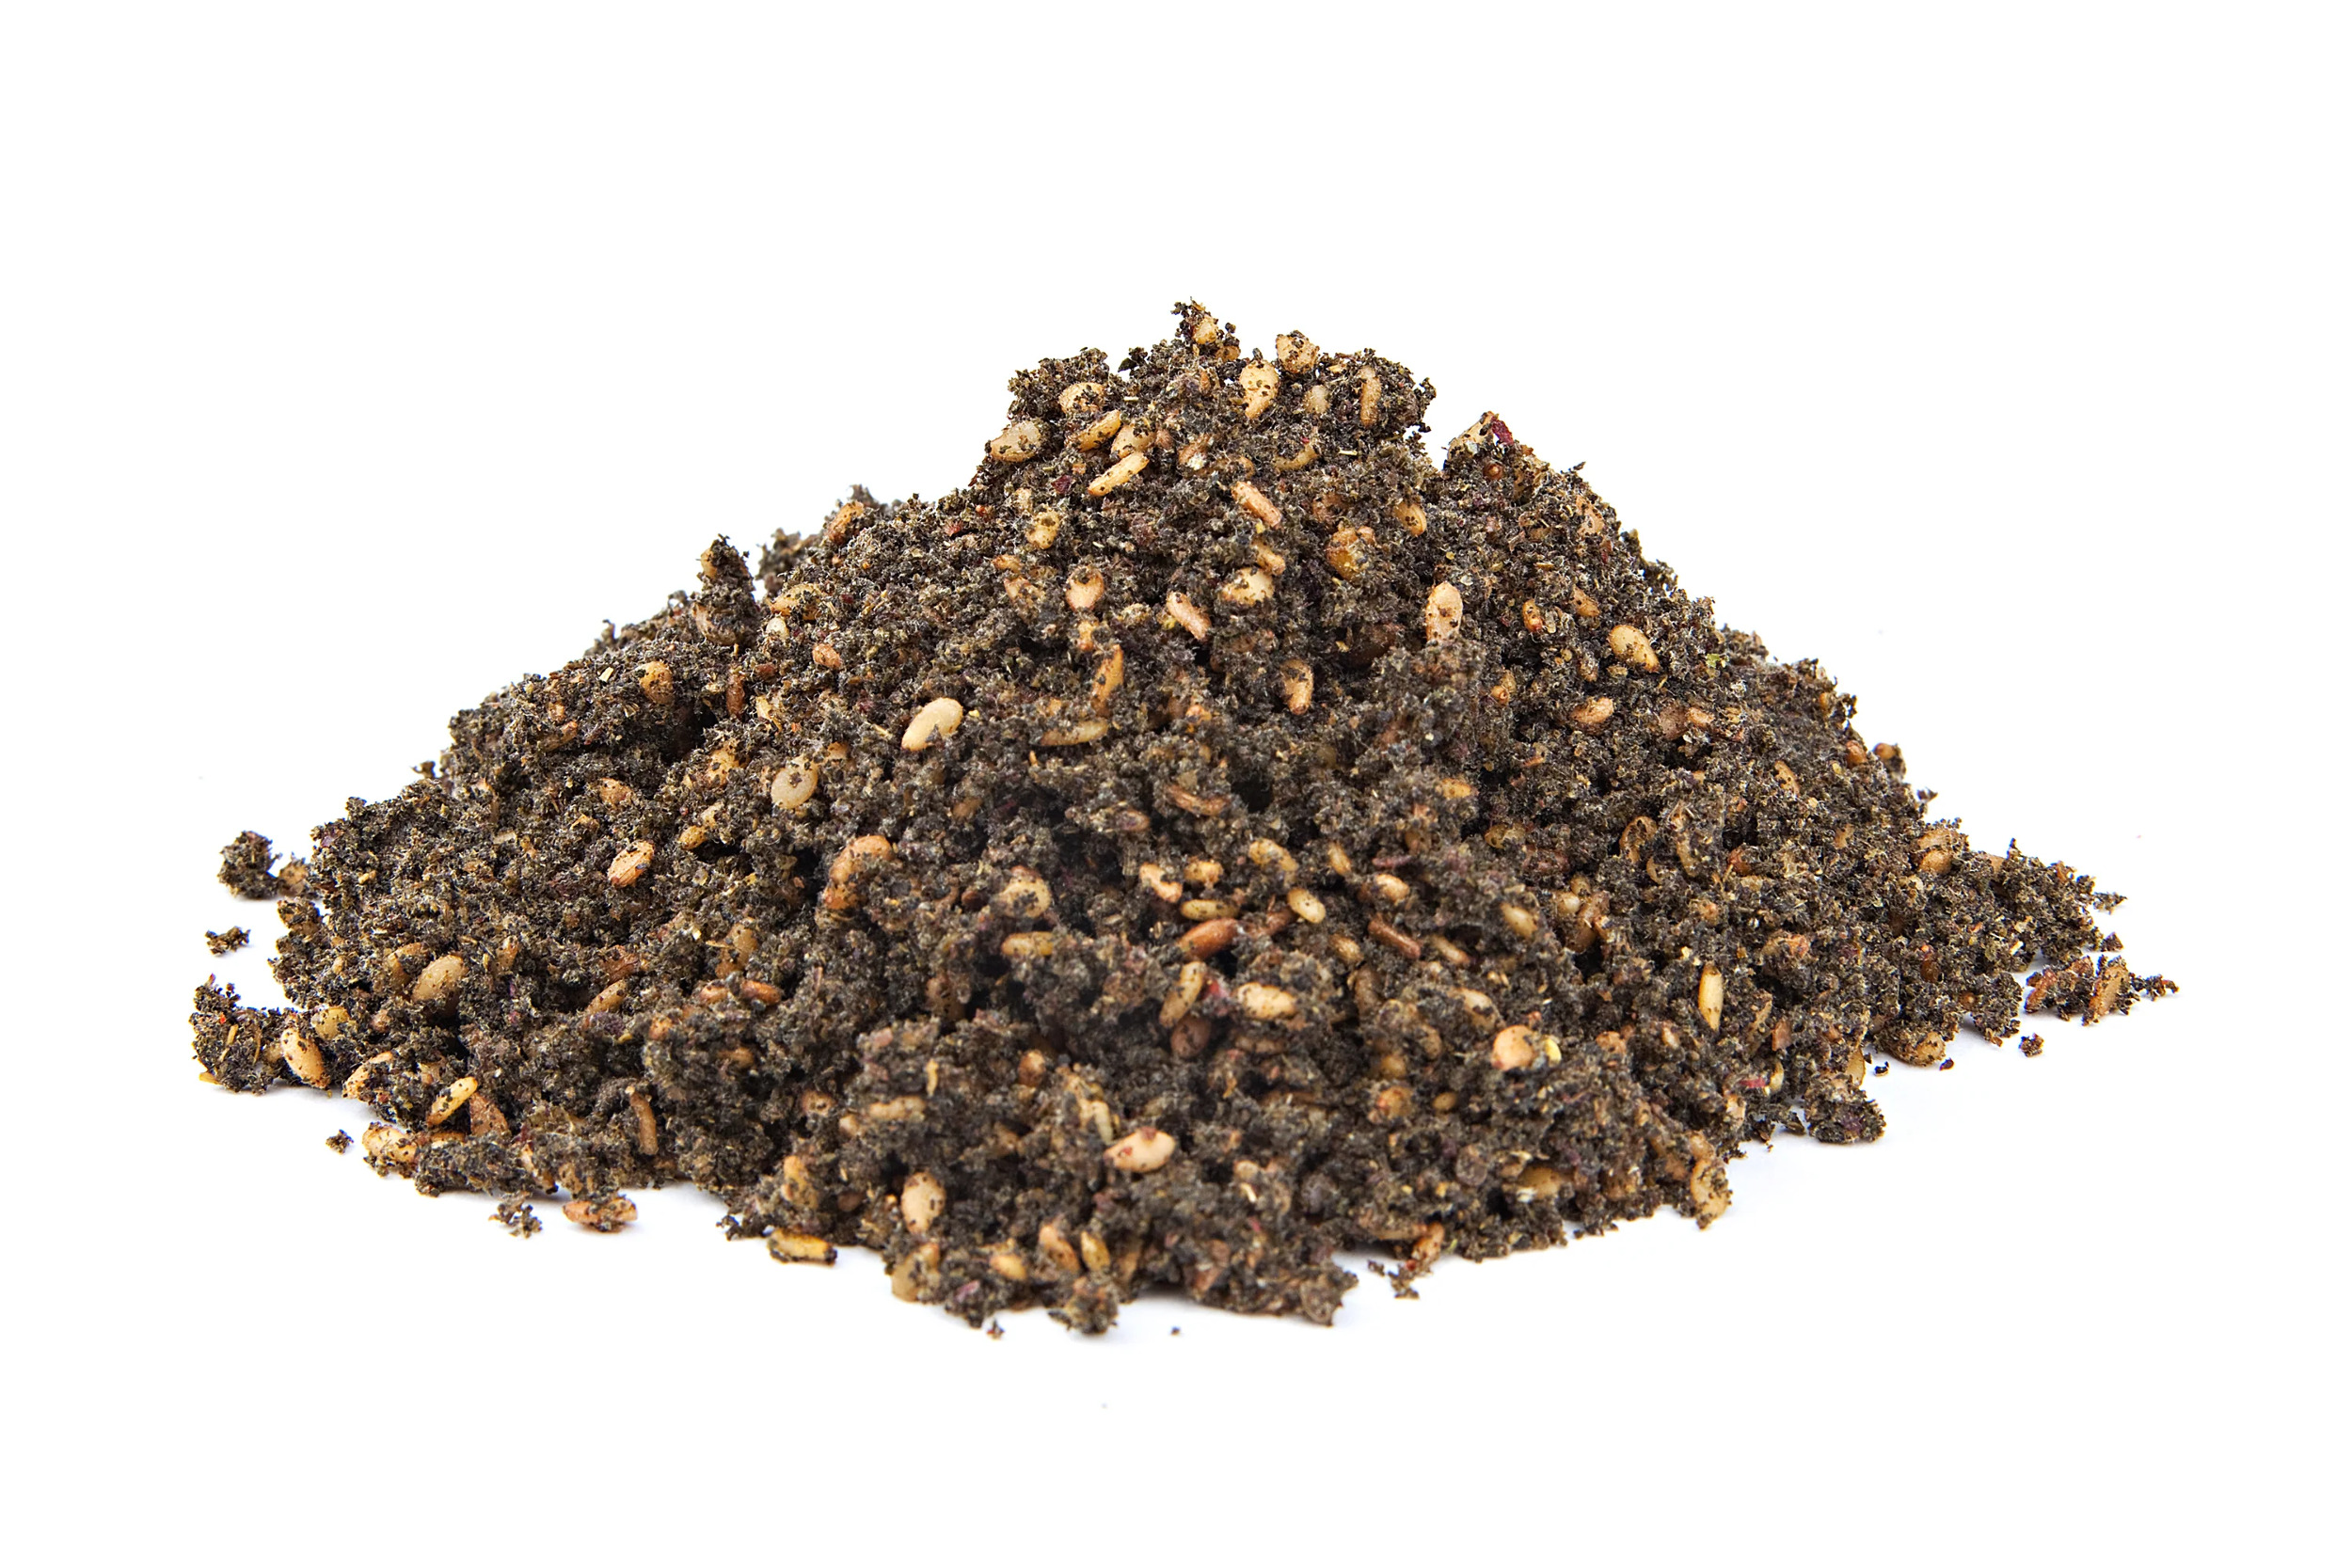 The Spice Way Real Zaatar - Middle Eastern Spice Blend – All Natural with Hyssop and Sumac - 4 oz. - image 2 of 8